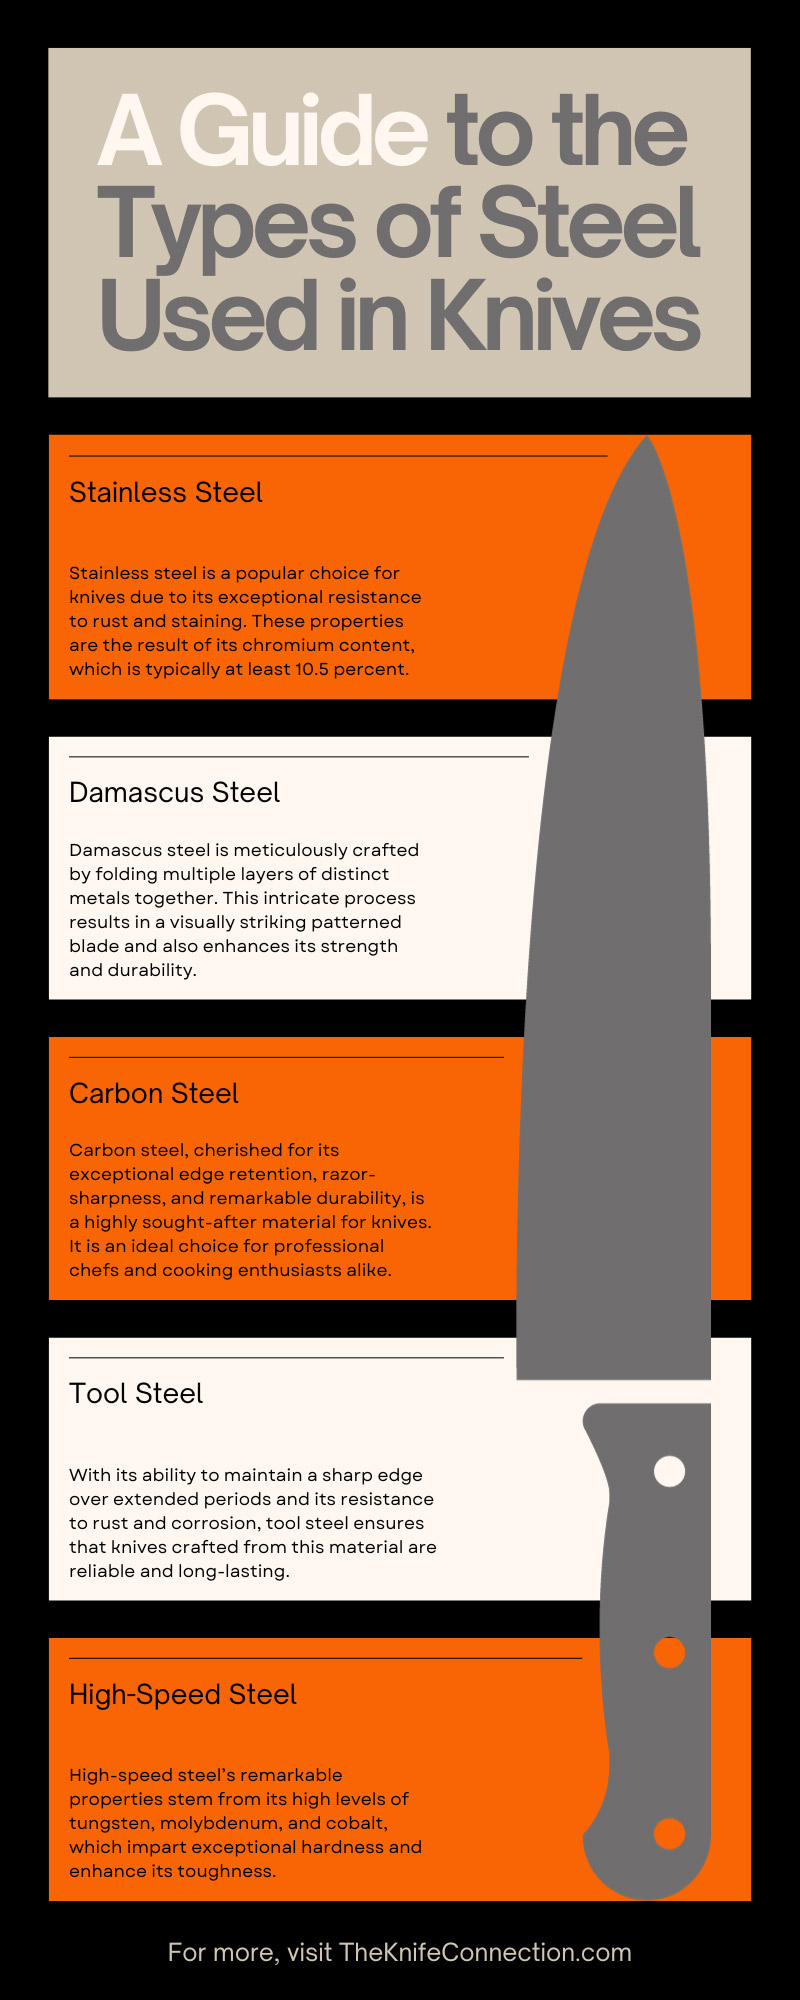 A Guide to the Types of Steel Used in Knives